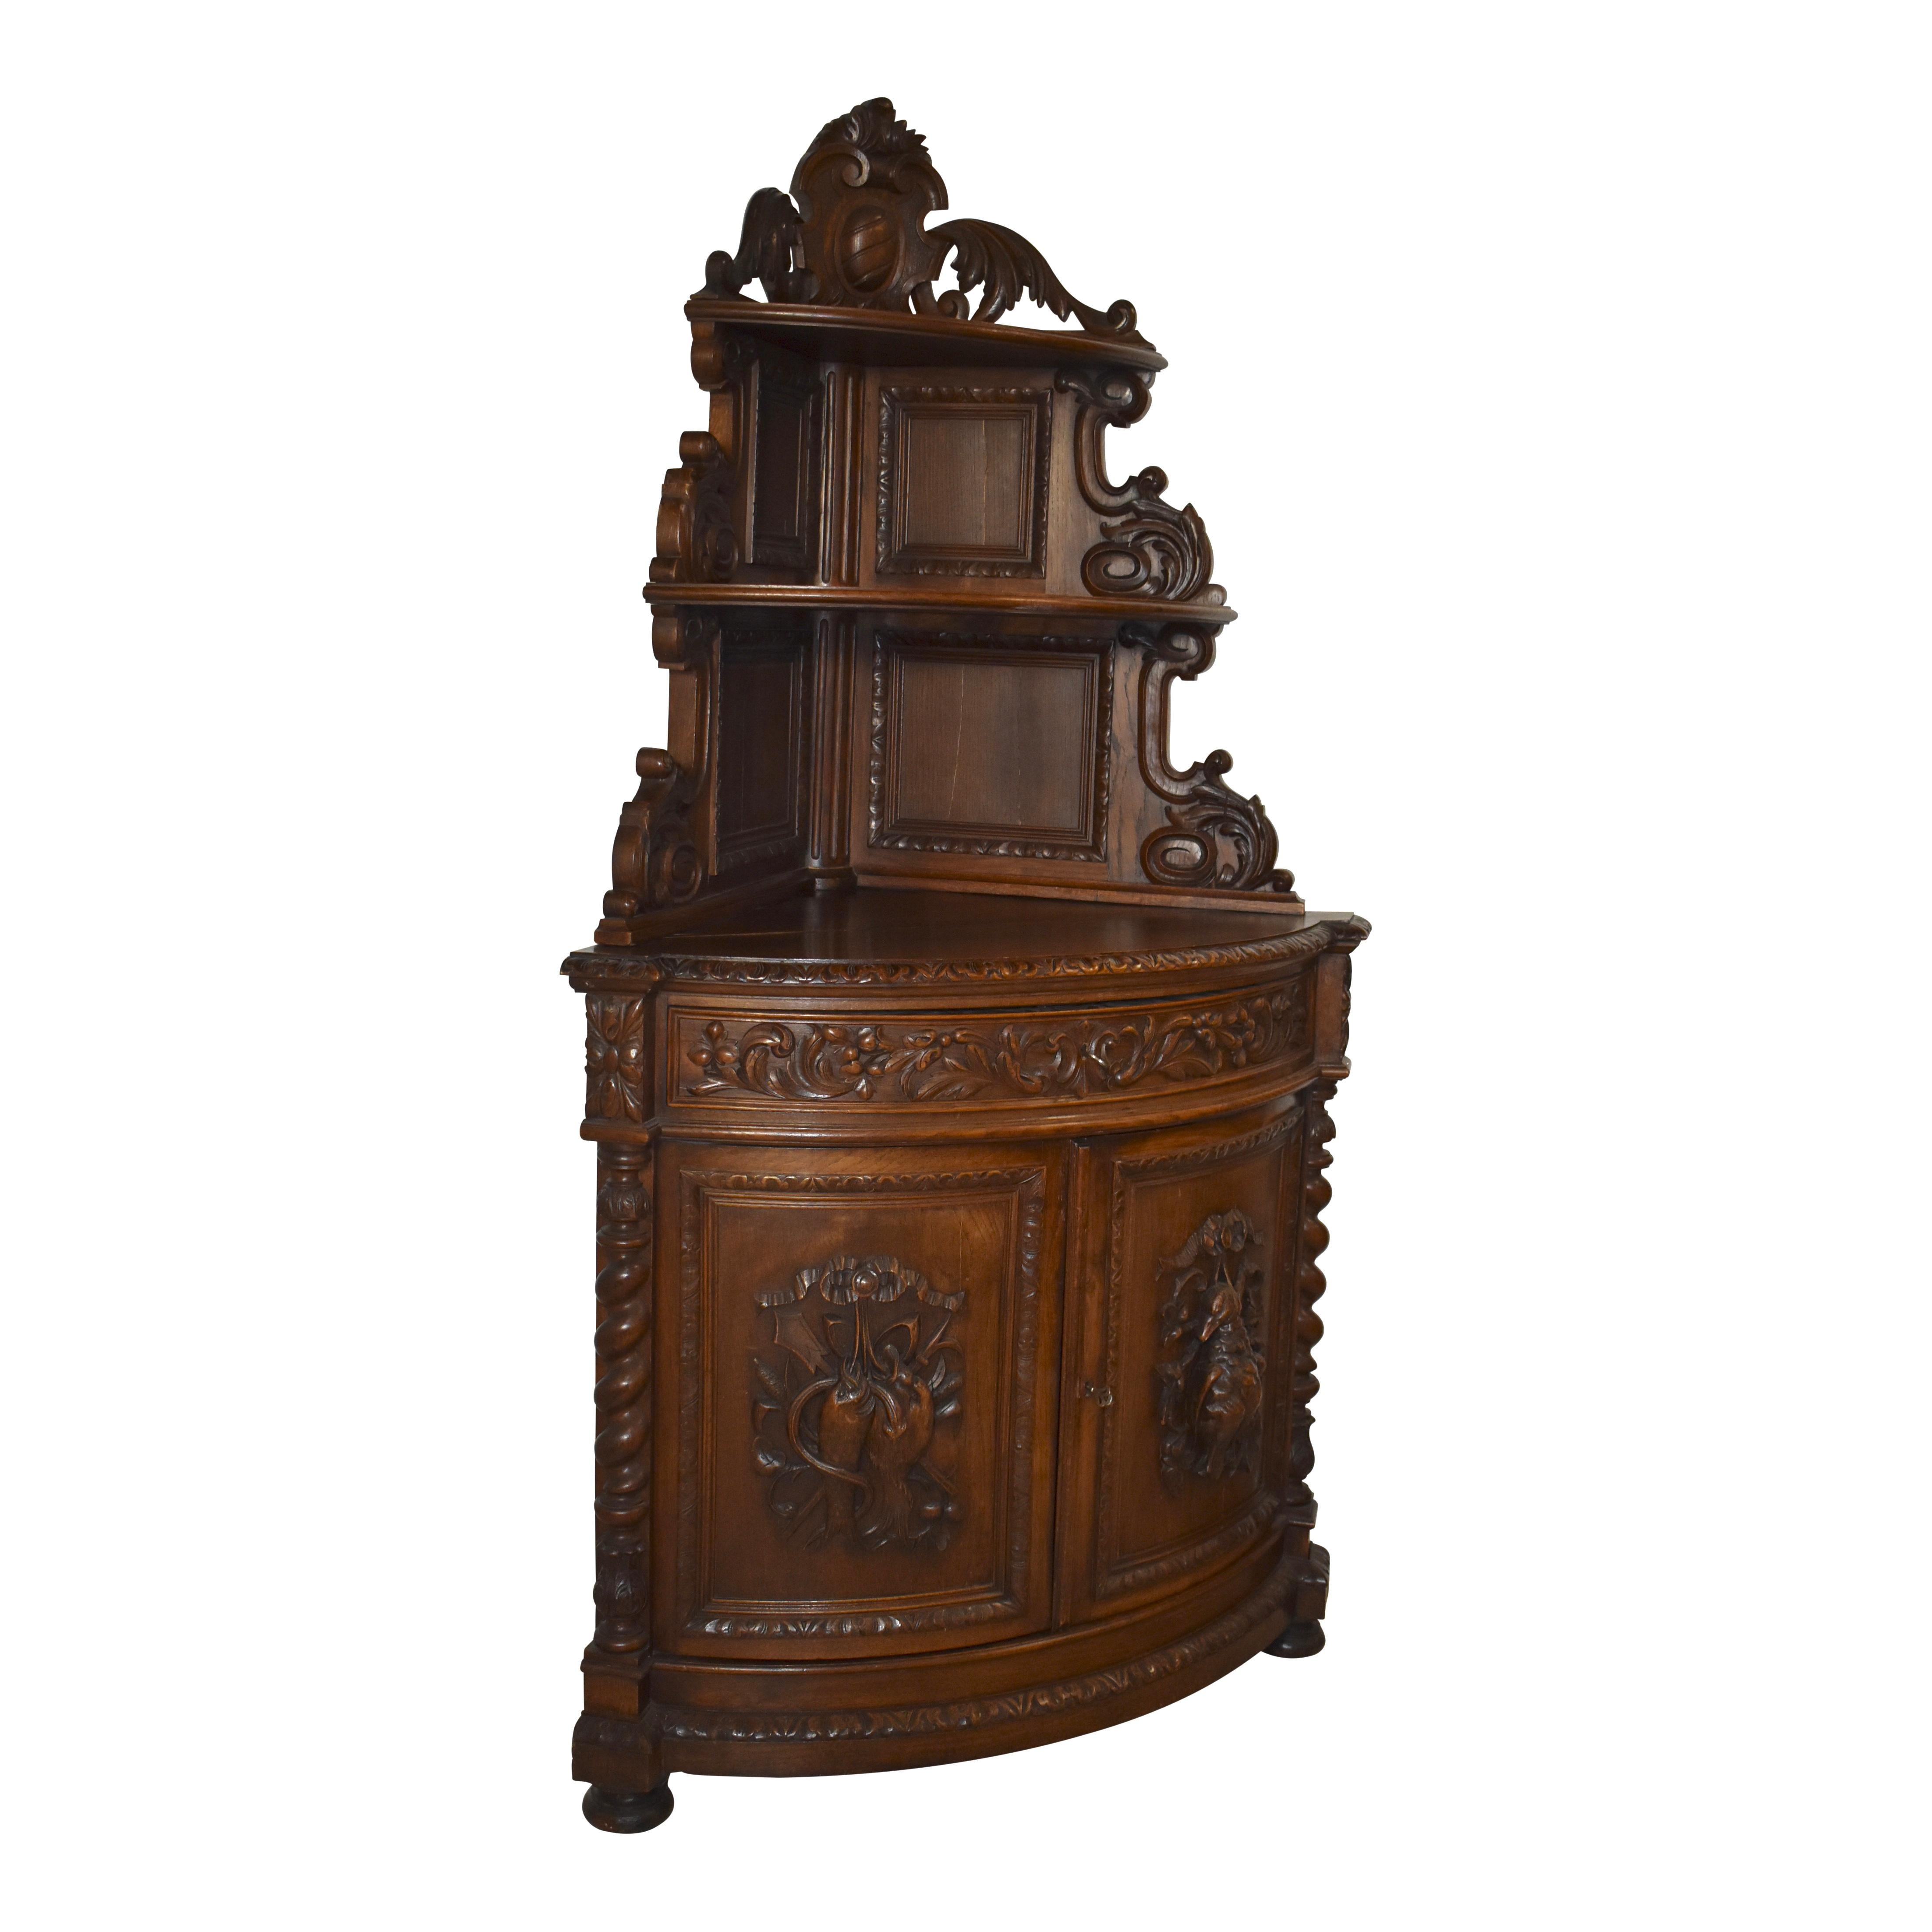 Magnificently carved in the late-19th century from solid oak and finished with a rich, dark stain, this handsome corner cabinet showcases bow front construction in both its open shelving at the top and cabinet at the bottom. The open shelving